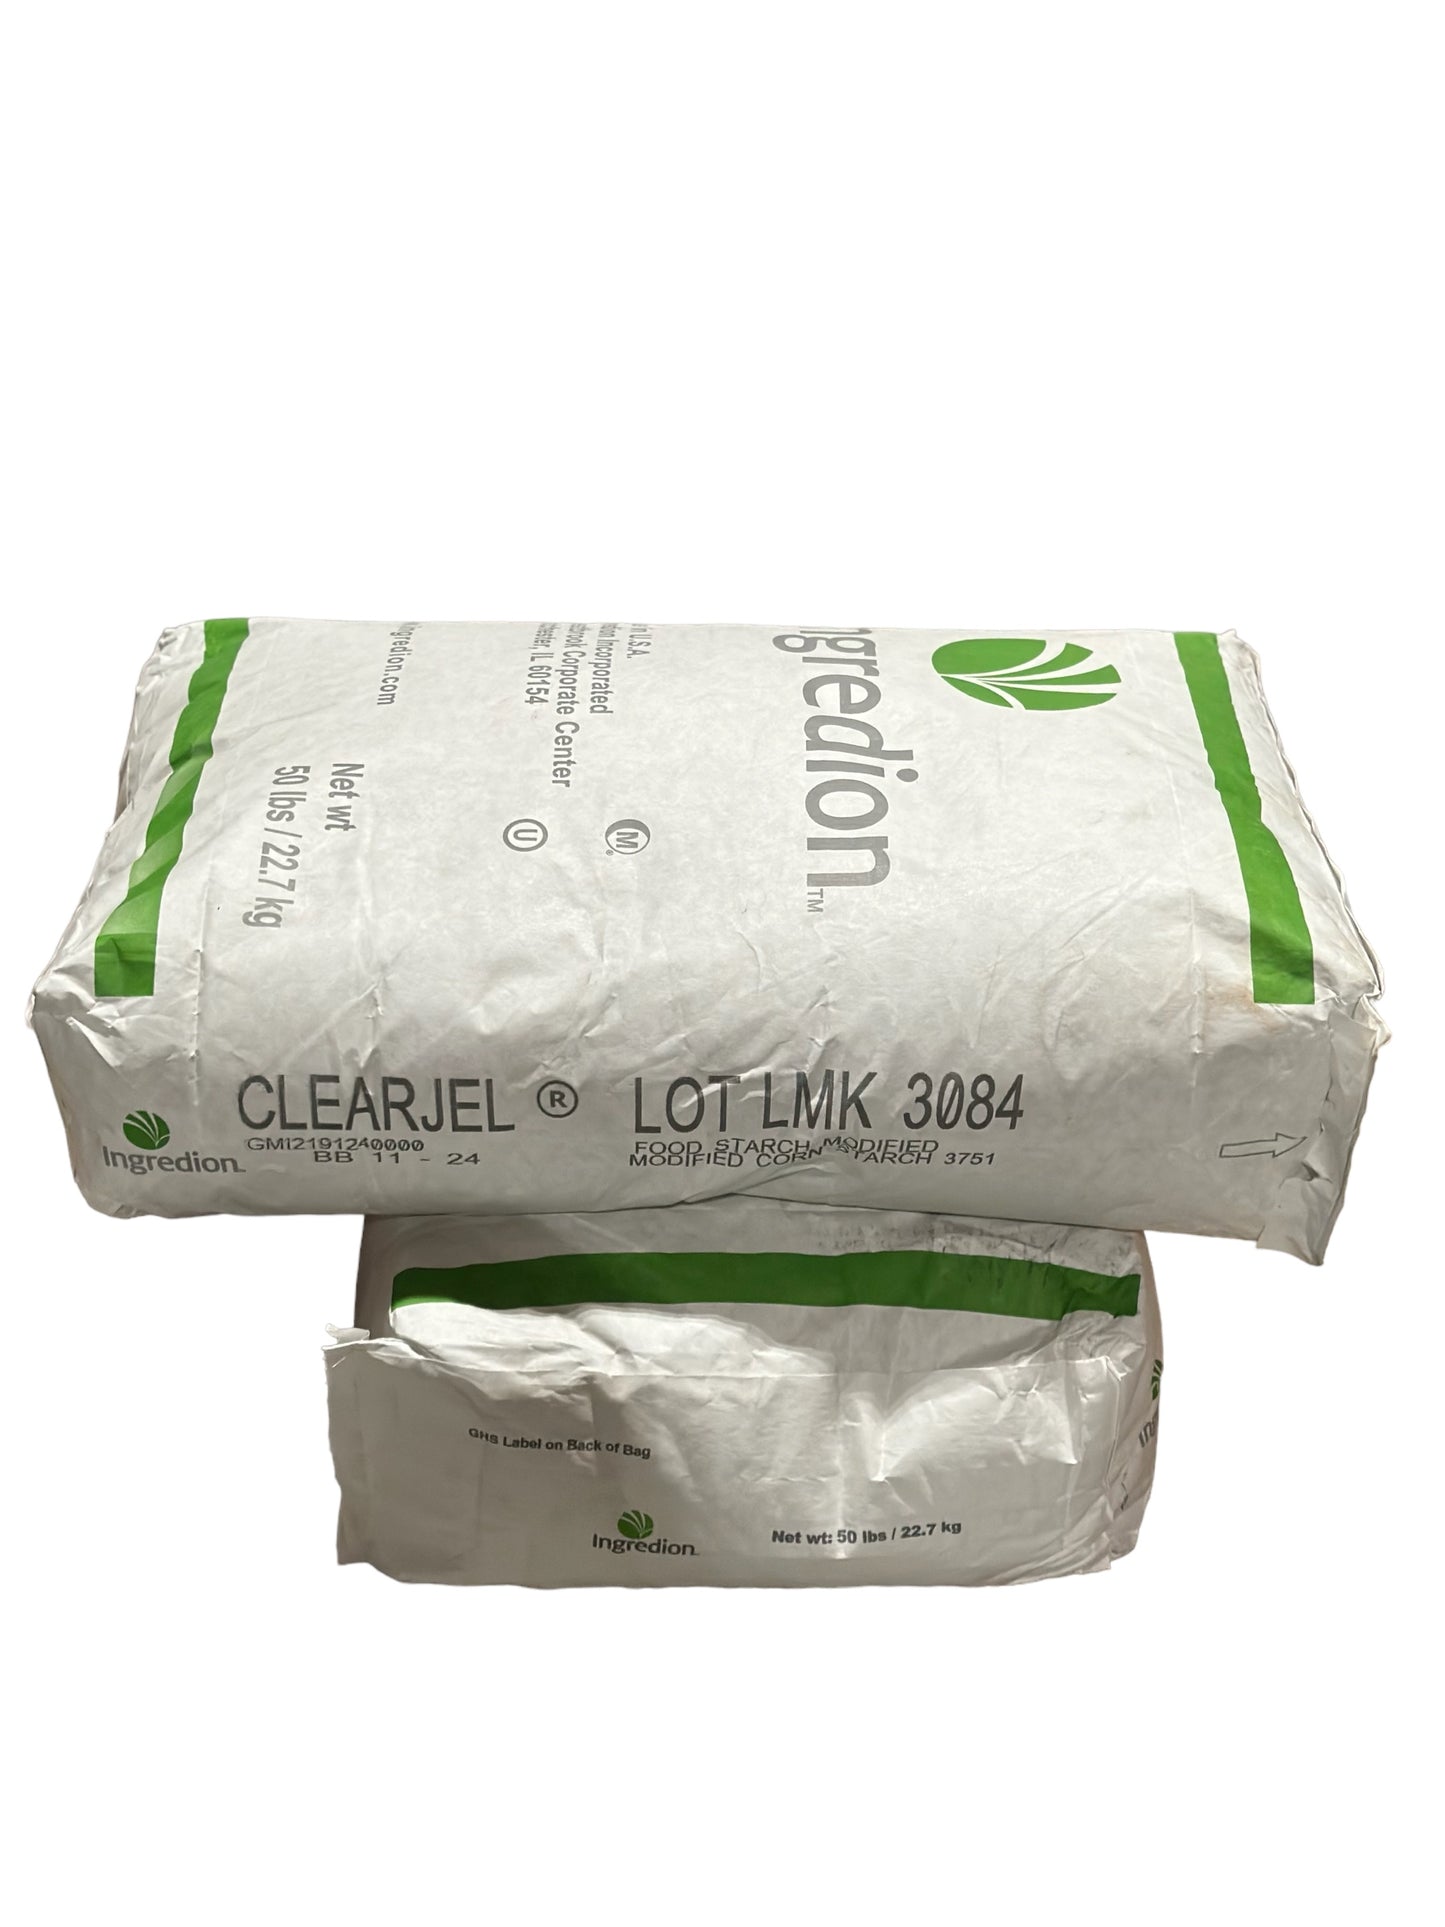 Clearjel - 50 lb(Non-instant)